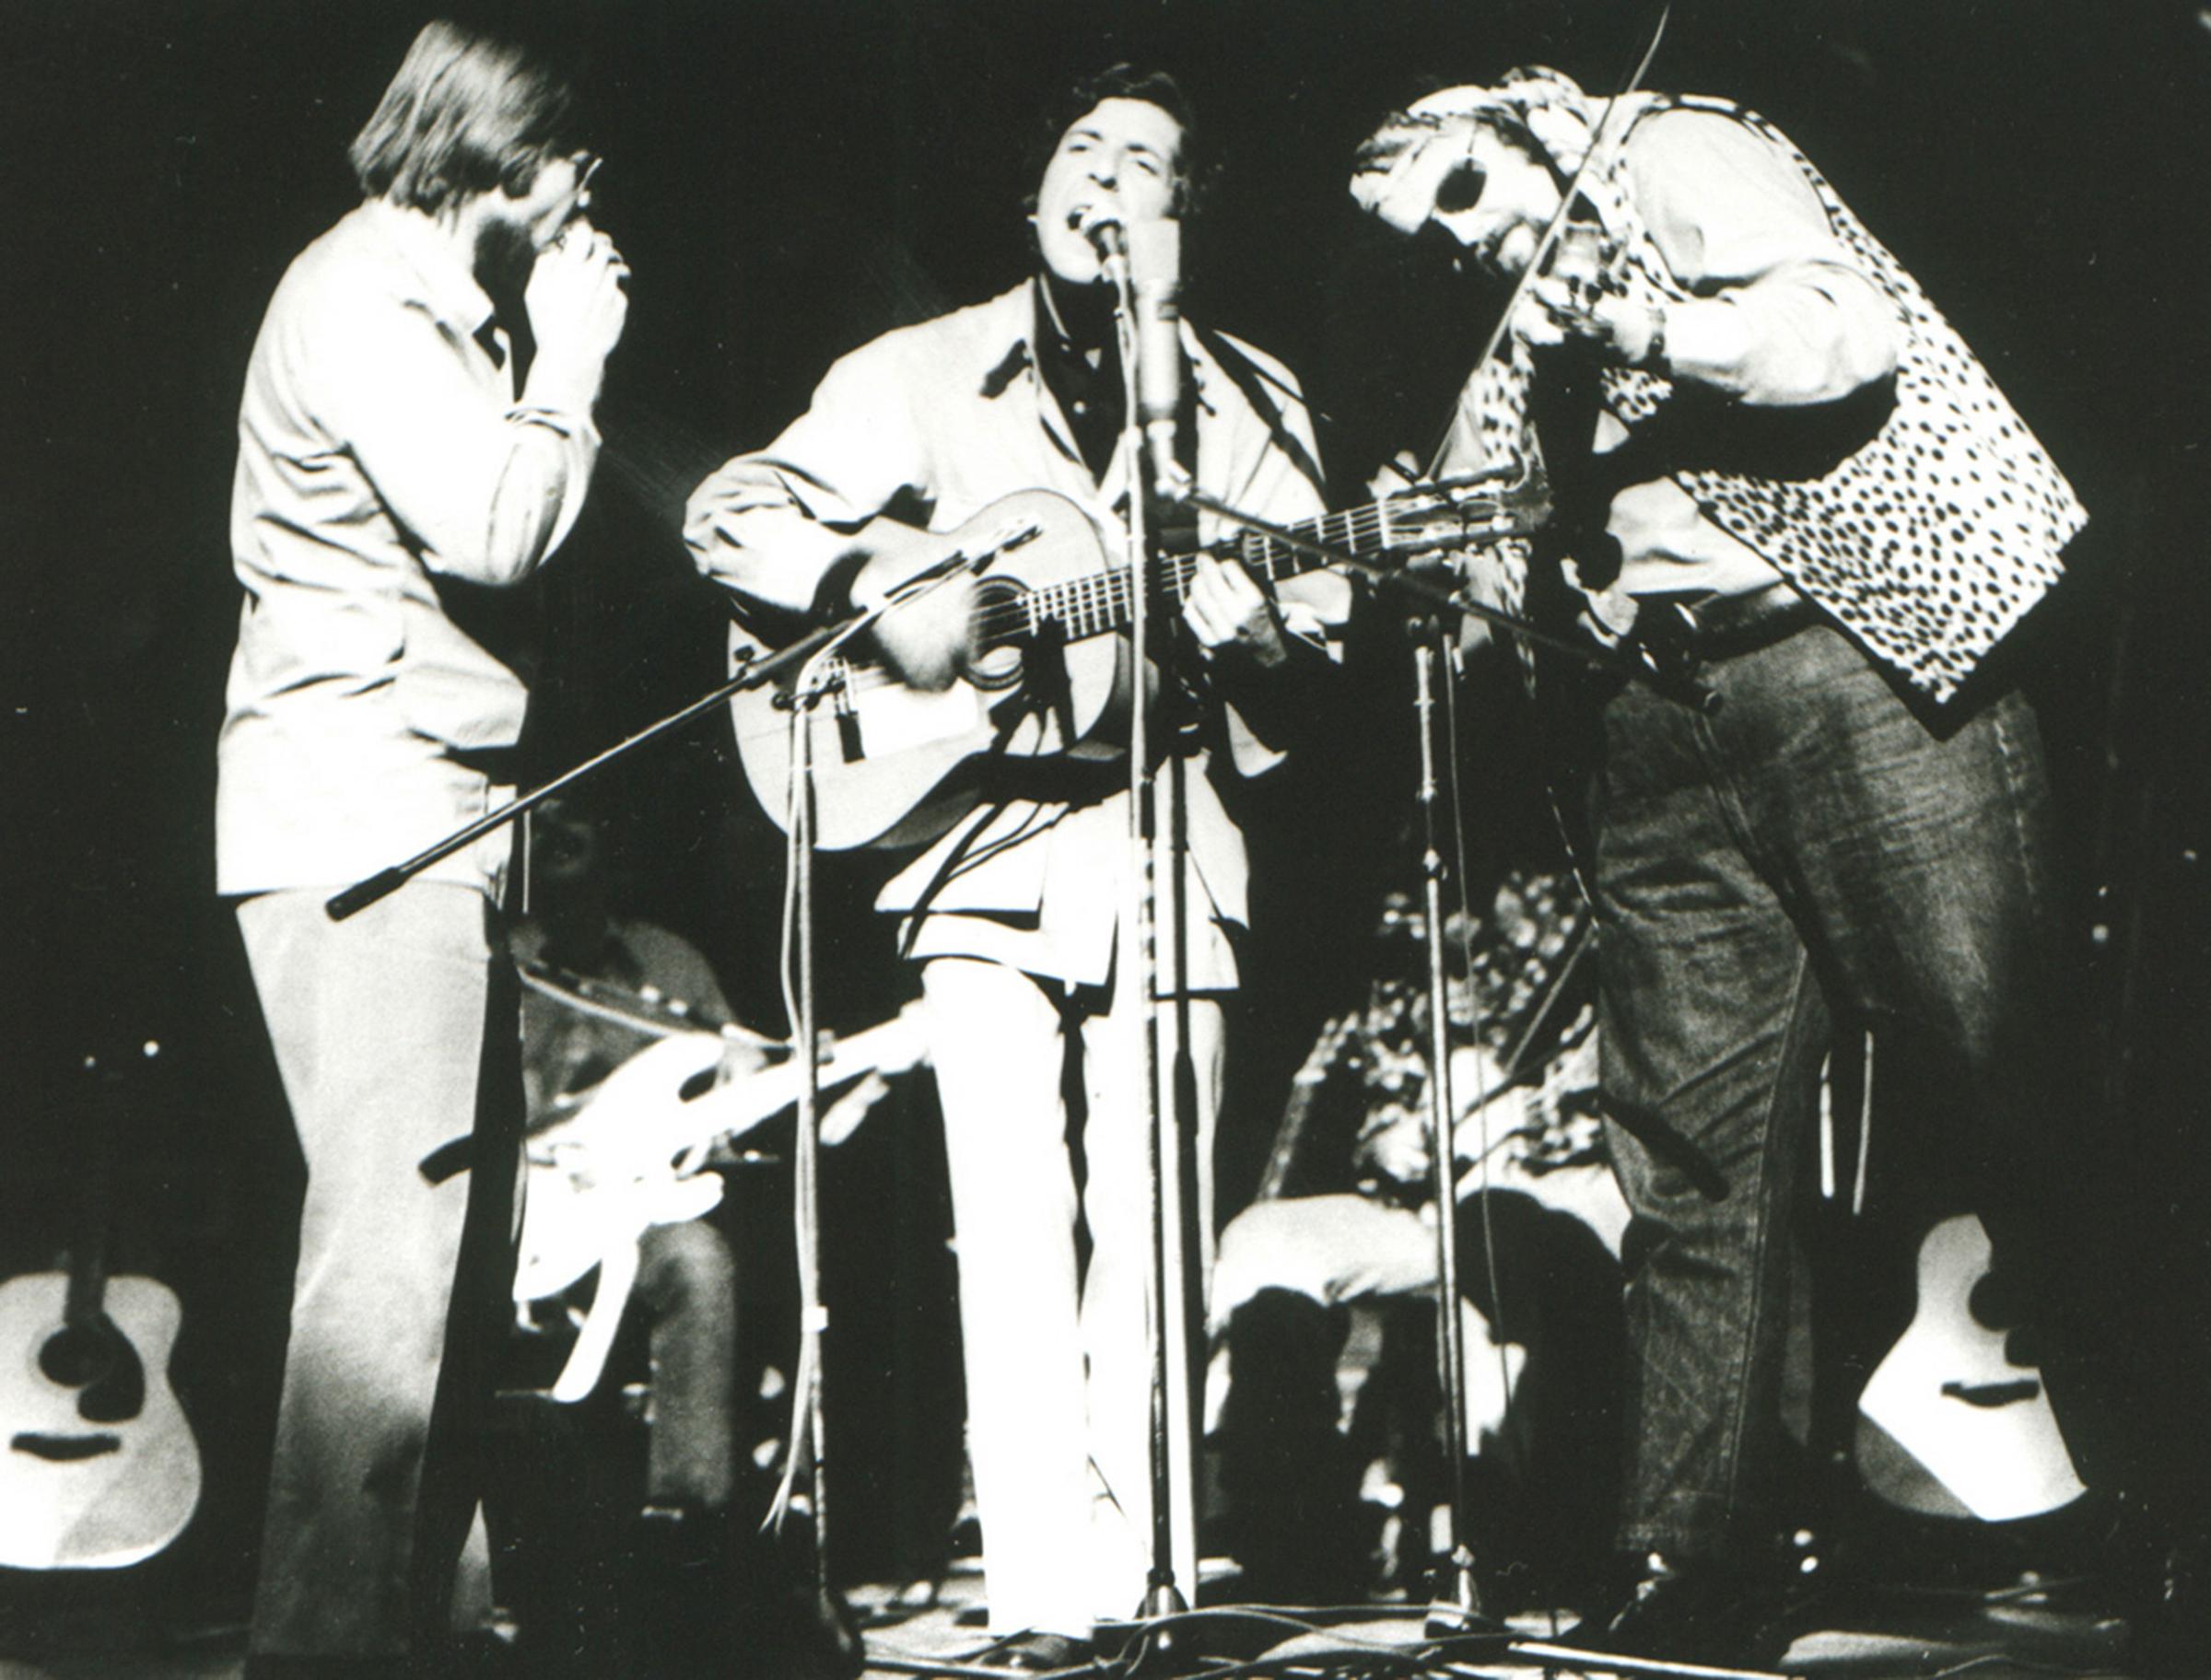 Bob Johnston, Ron Cornelius (seated), Leonard Cohen, and Charlie Daniels, early 1970s. Photo courtesy of Ron Cornelius and the Country Music Hall of Fame and Museum.